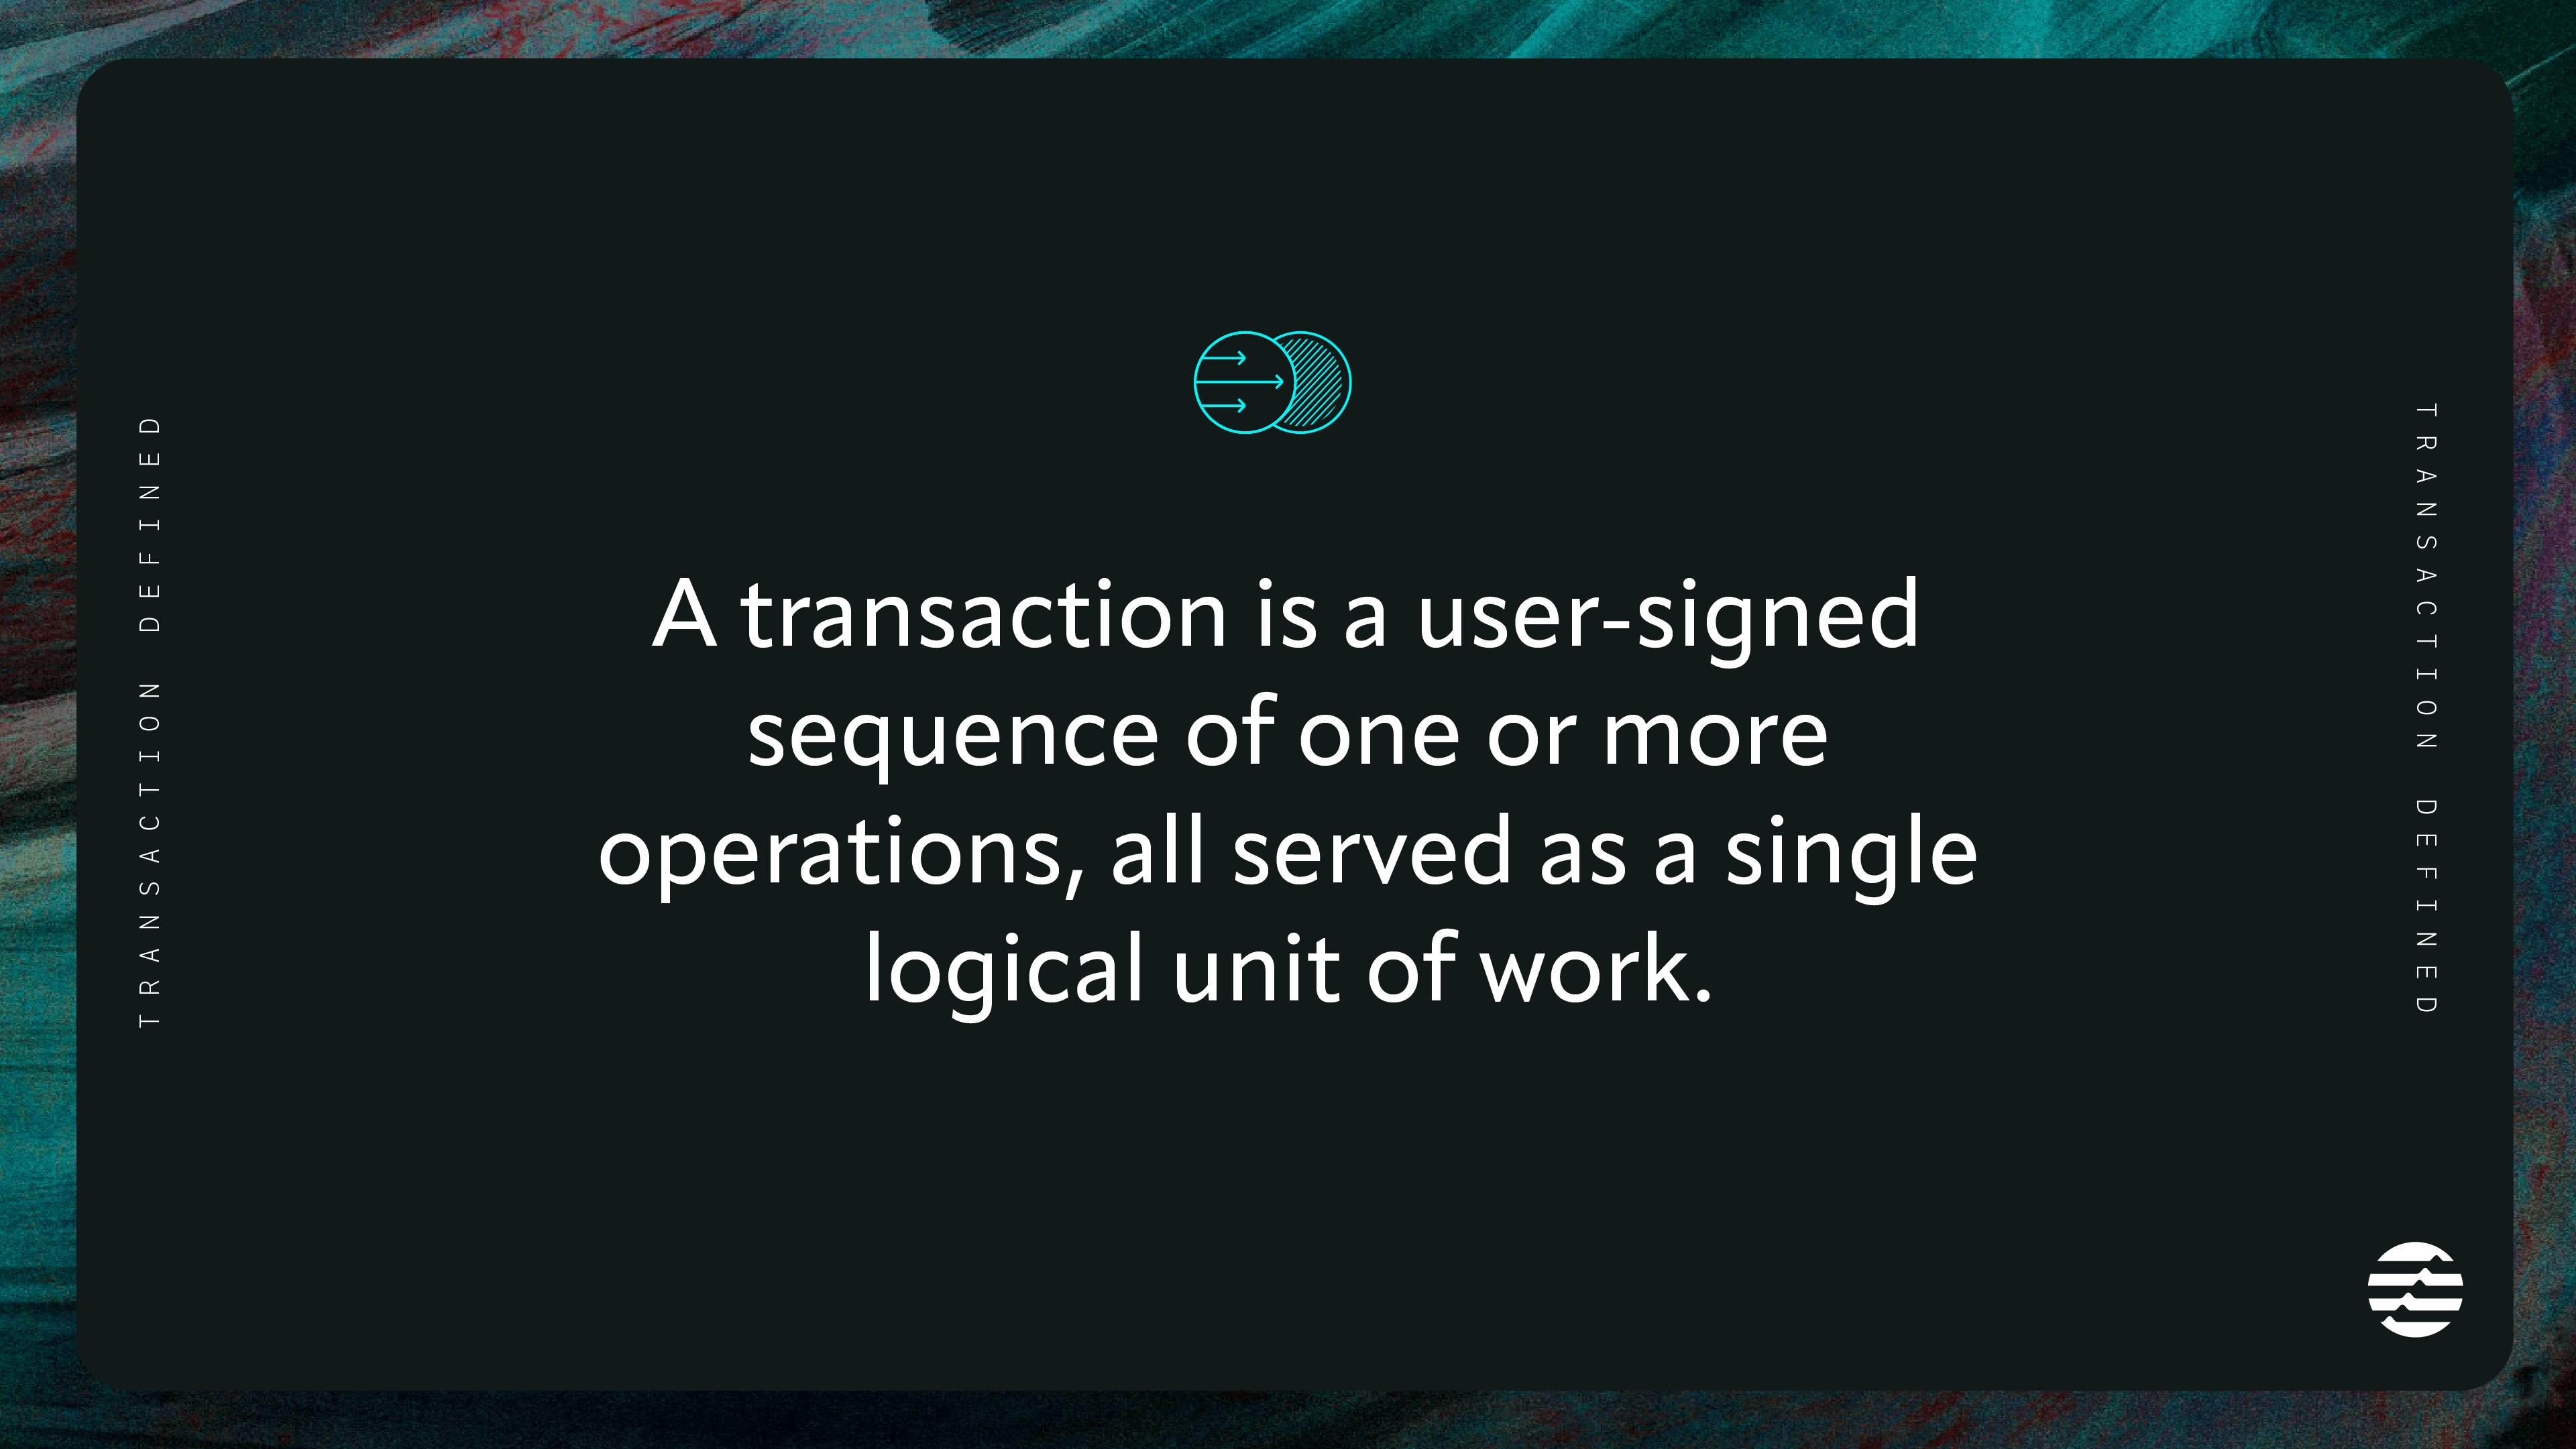 A transaction is a user-signed sequence of one or more operations, all served as a single logical unit of work.